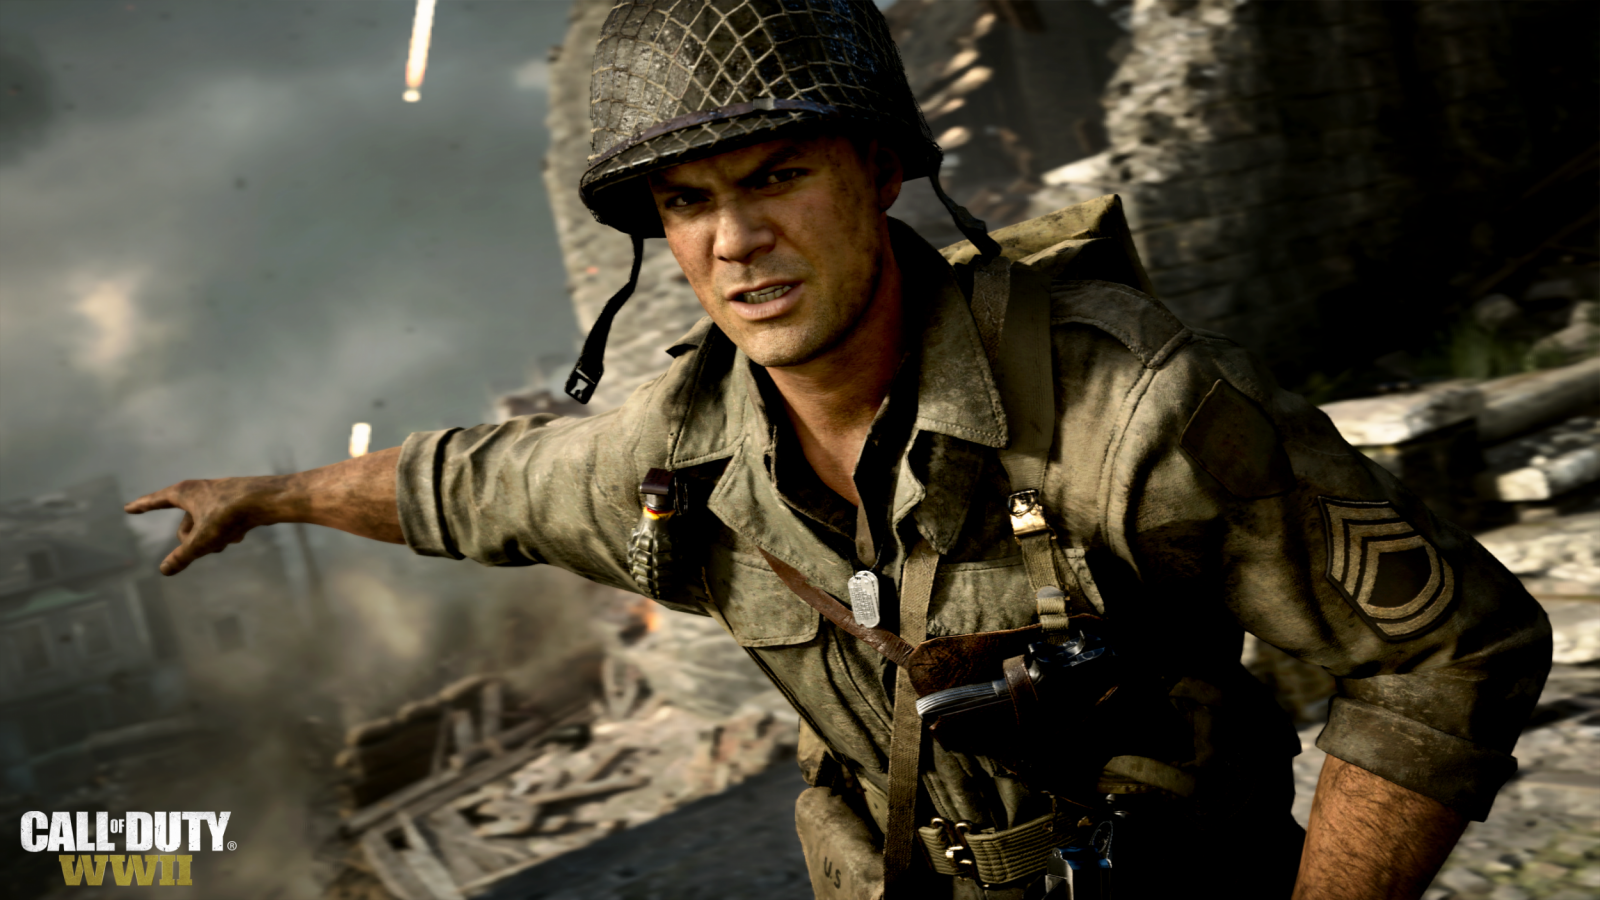 Call of Duty: WWII' Update 1.20 Adds Commando Division